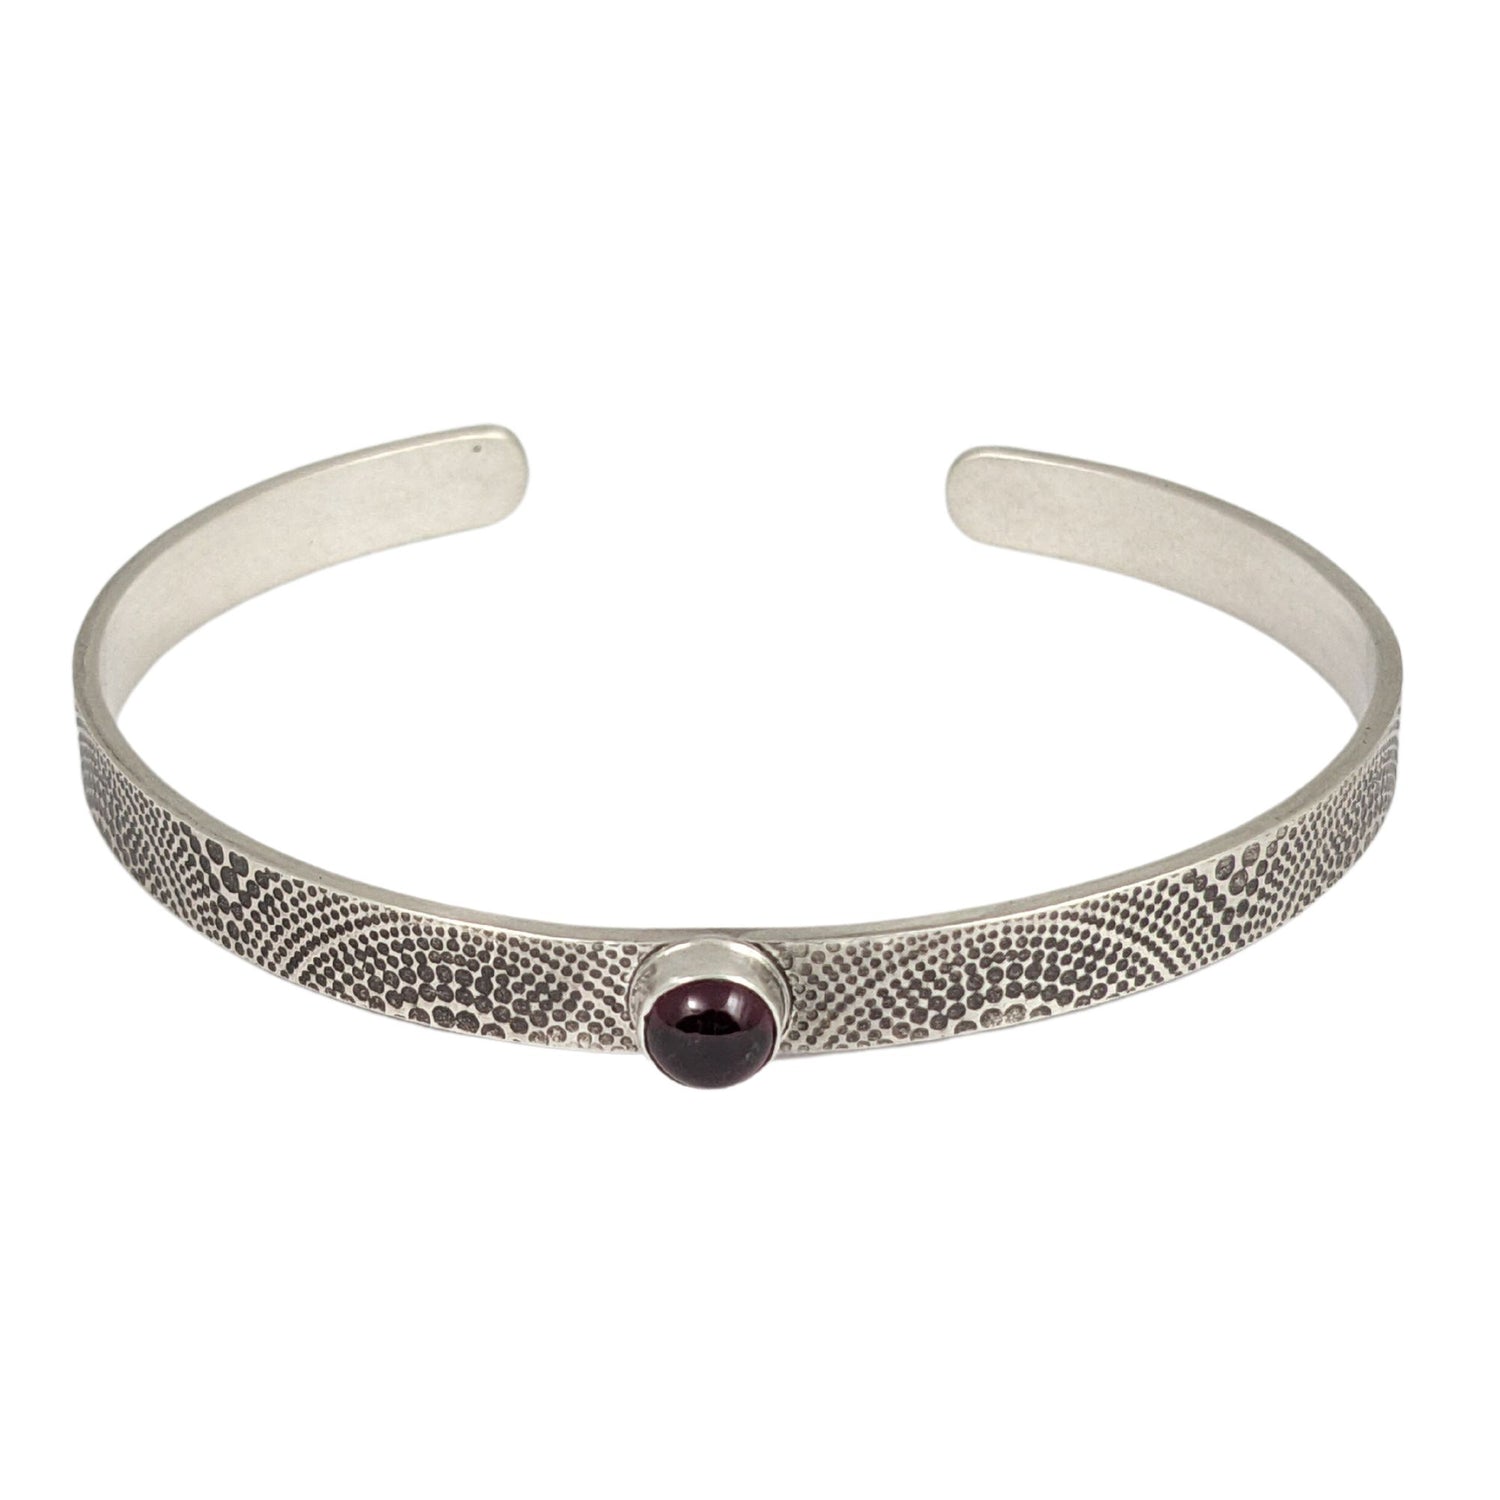 Narrow sterling silver cuff bracelet. The silver is covered with an arch pattern. In the center is a red garnet gemstone.